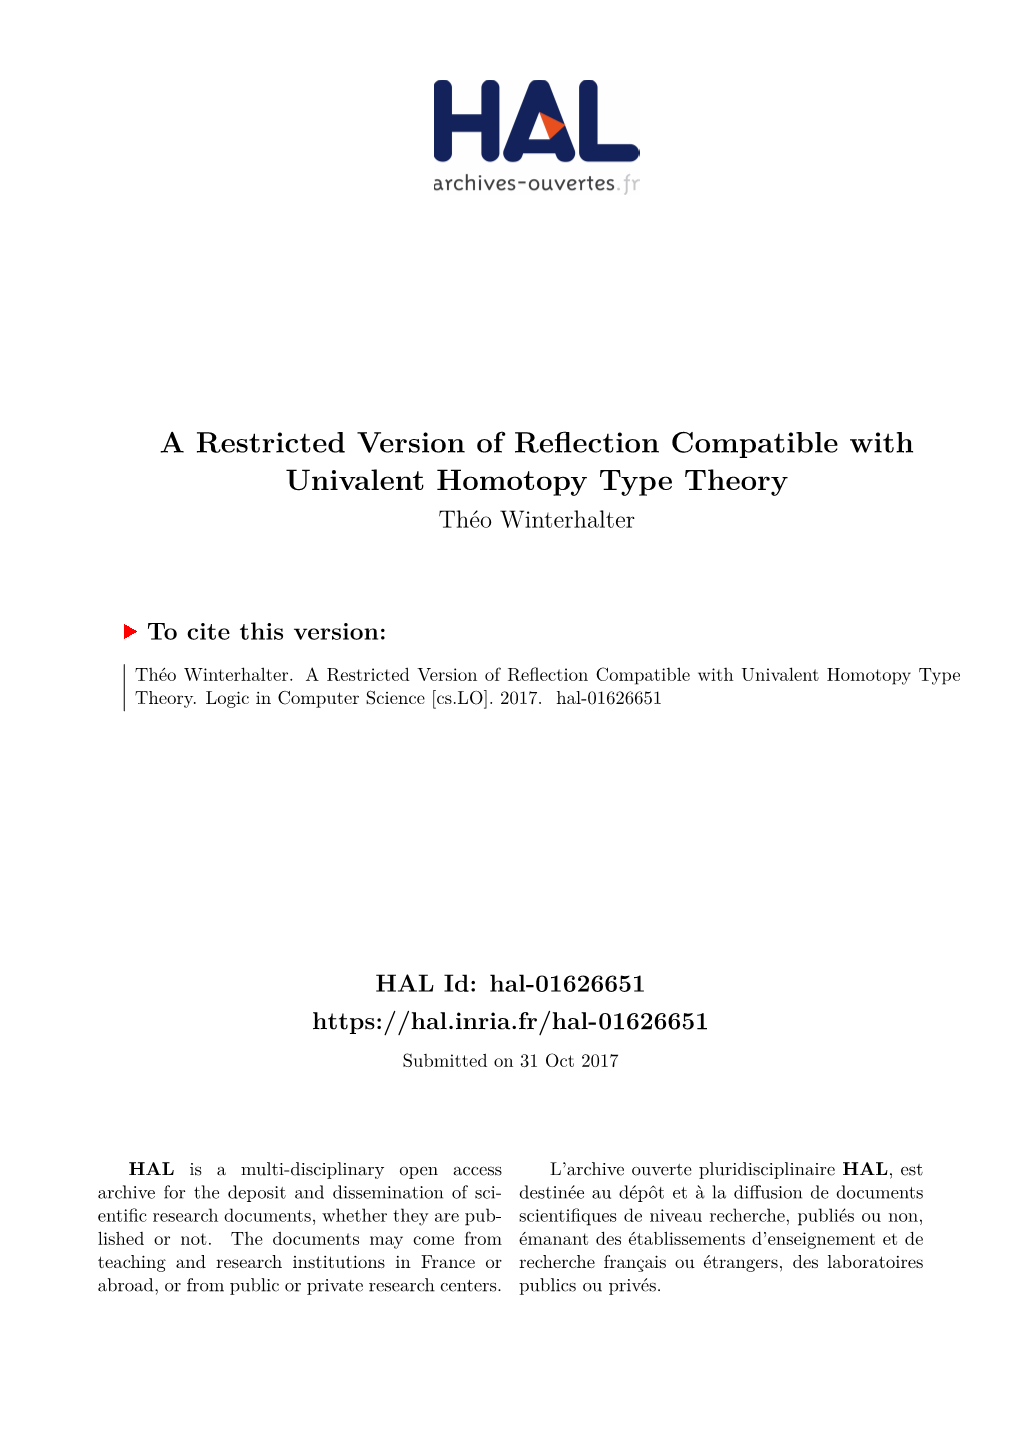 A Restricted Version of Reflection Compatible with Univalent Homotopy Type Theory Théo Winterhalter